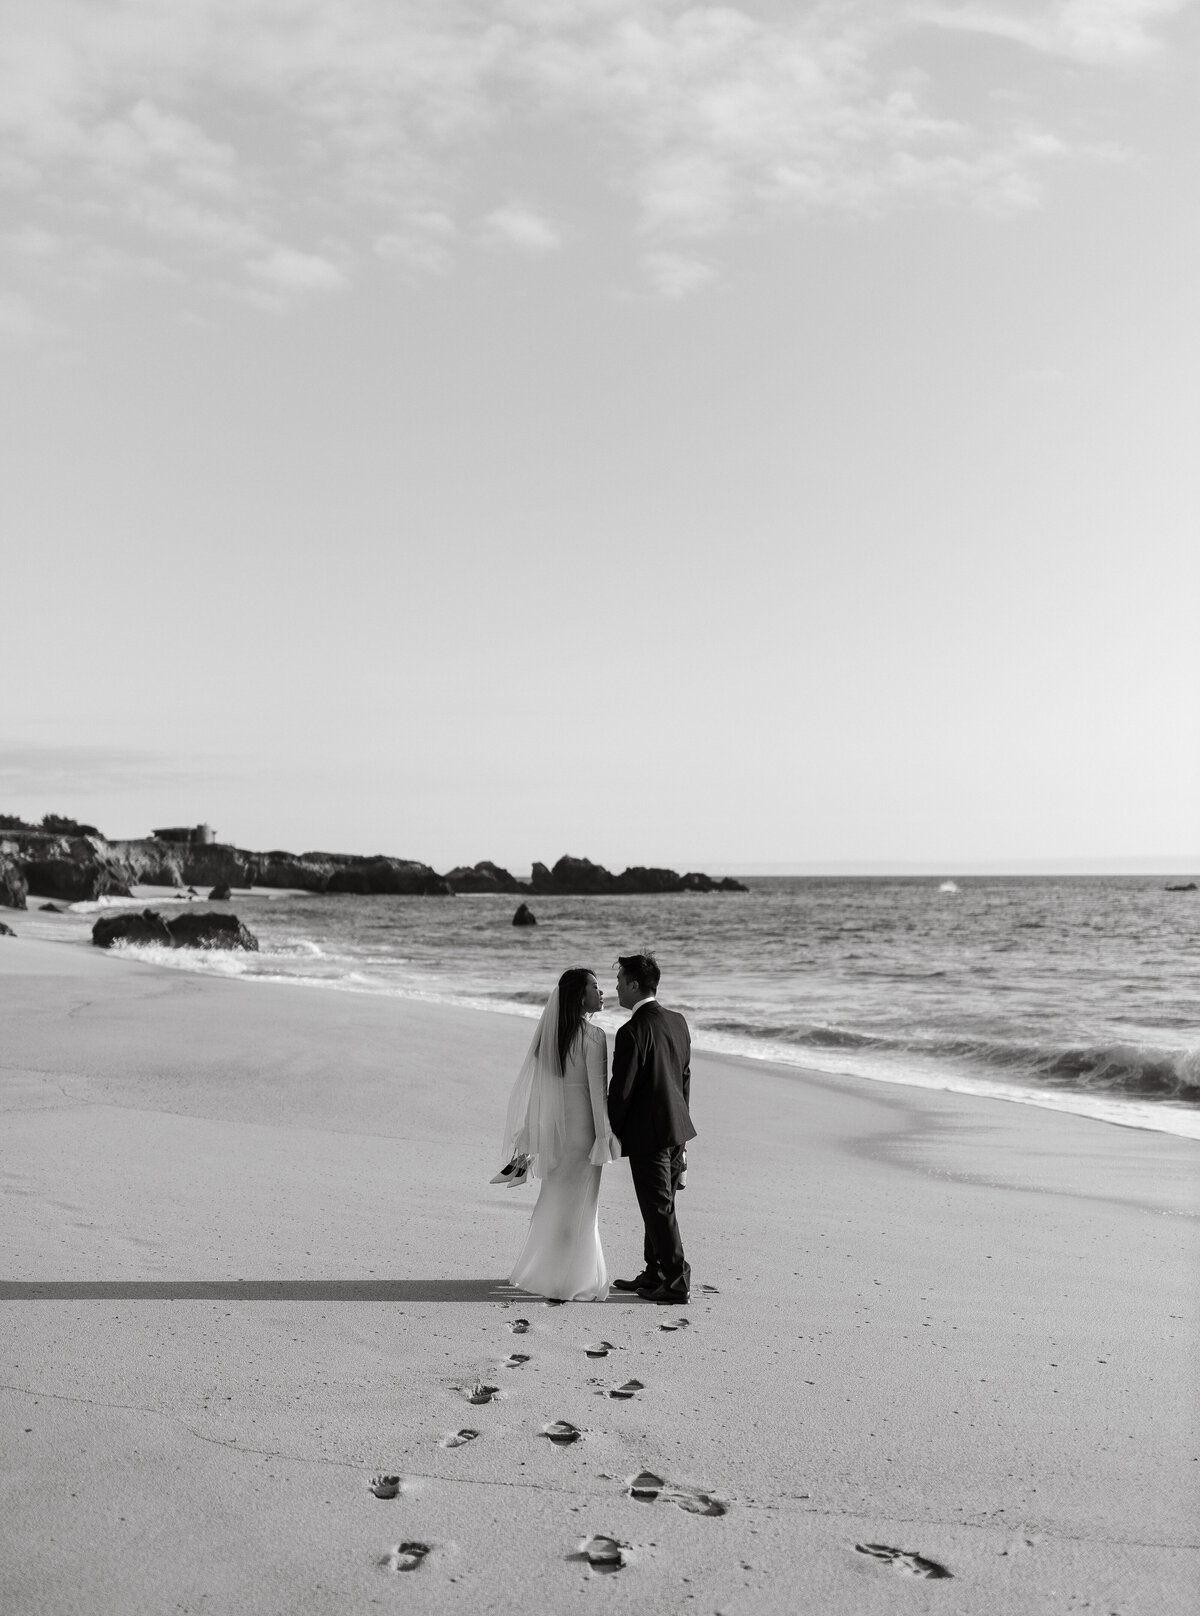 Wedding Photographer & Videographer, black and white image of bride and groom walking in the sand